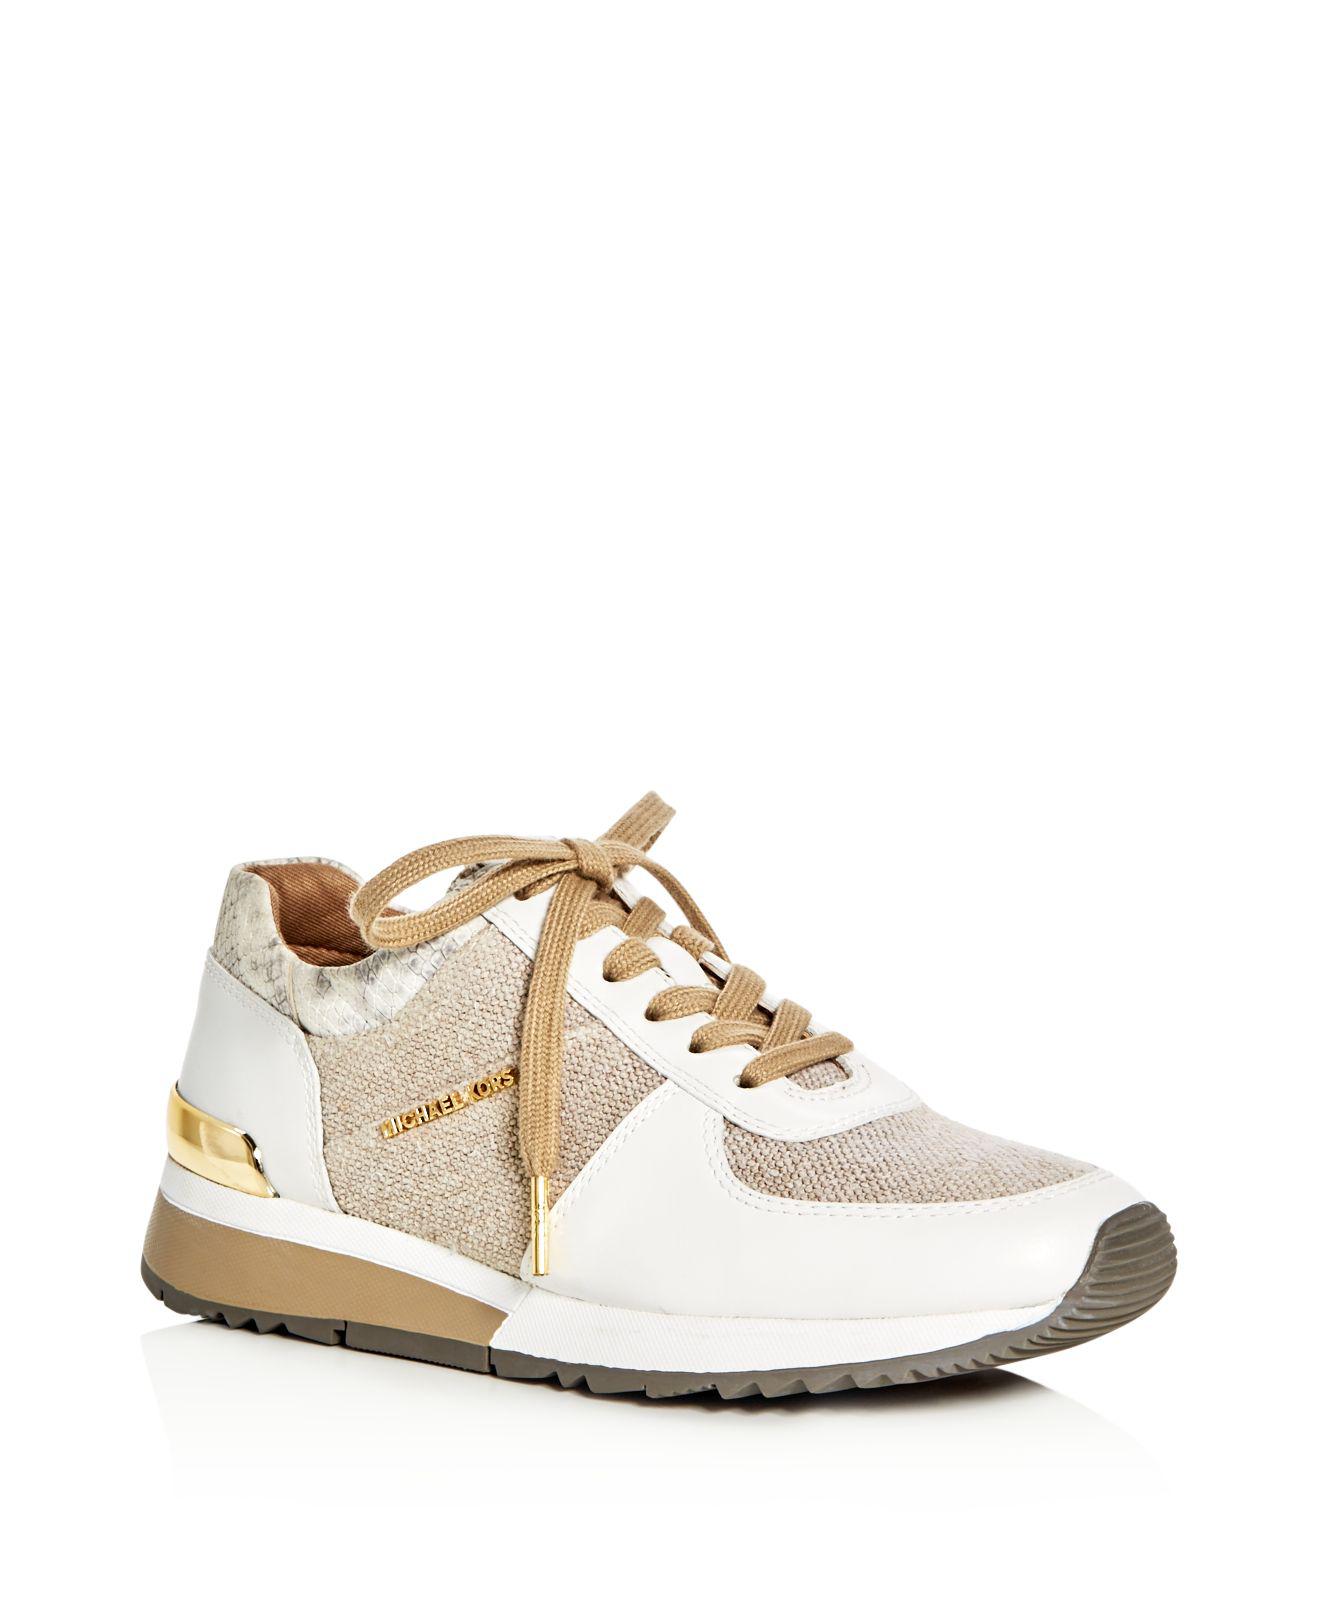 MICHAEL Michael Kors Allie Hemp Lace Up Sneakers in Natural - Lyst